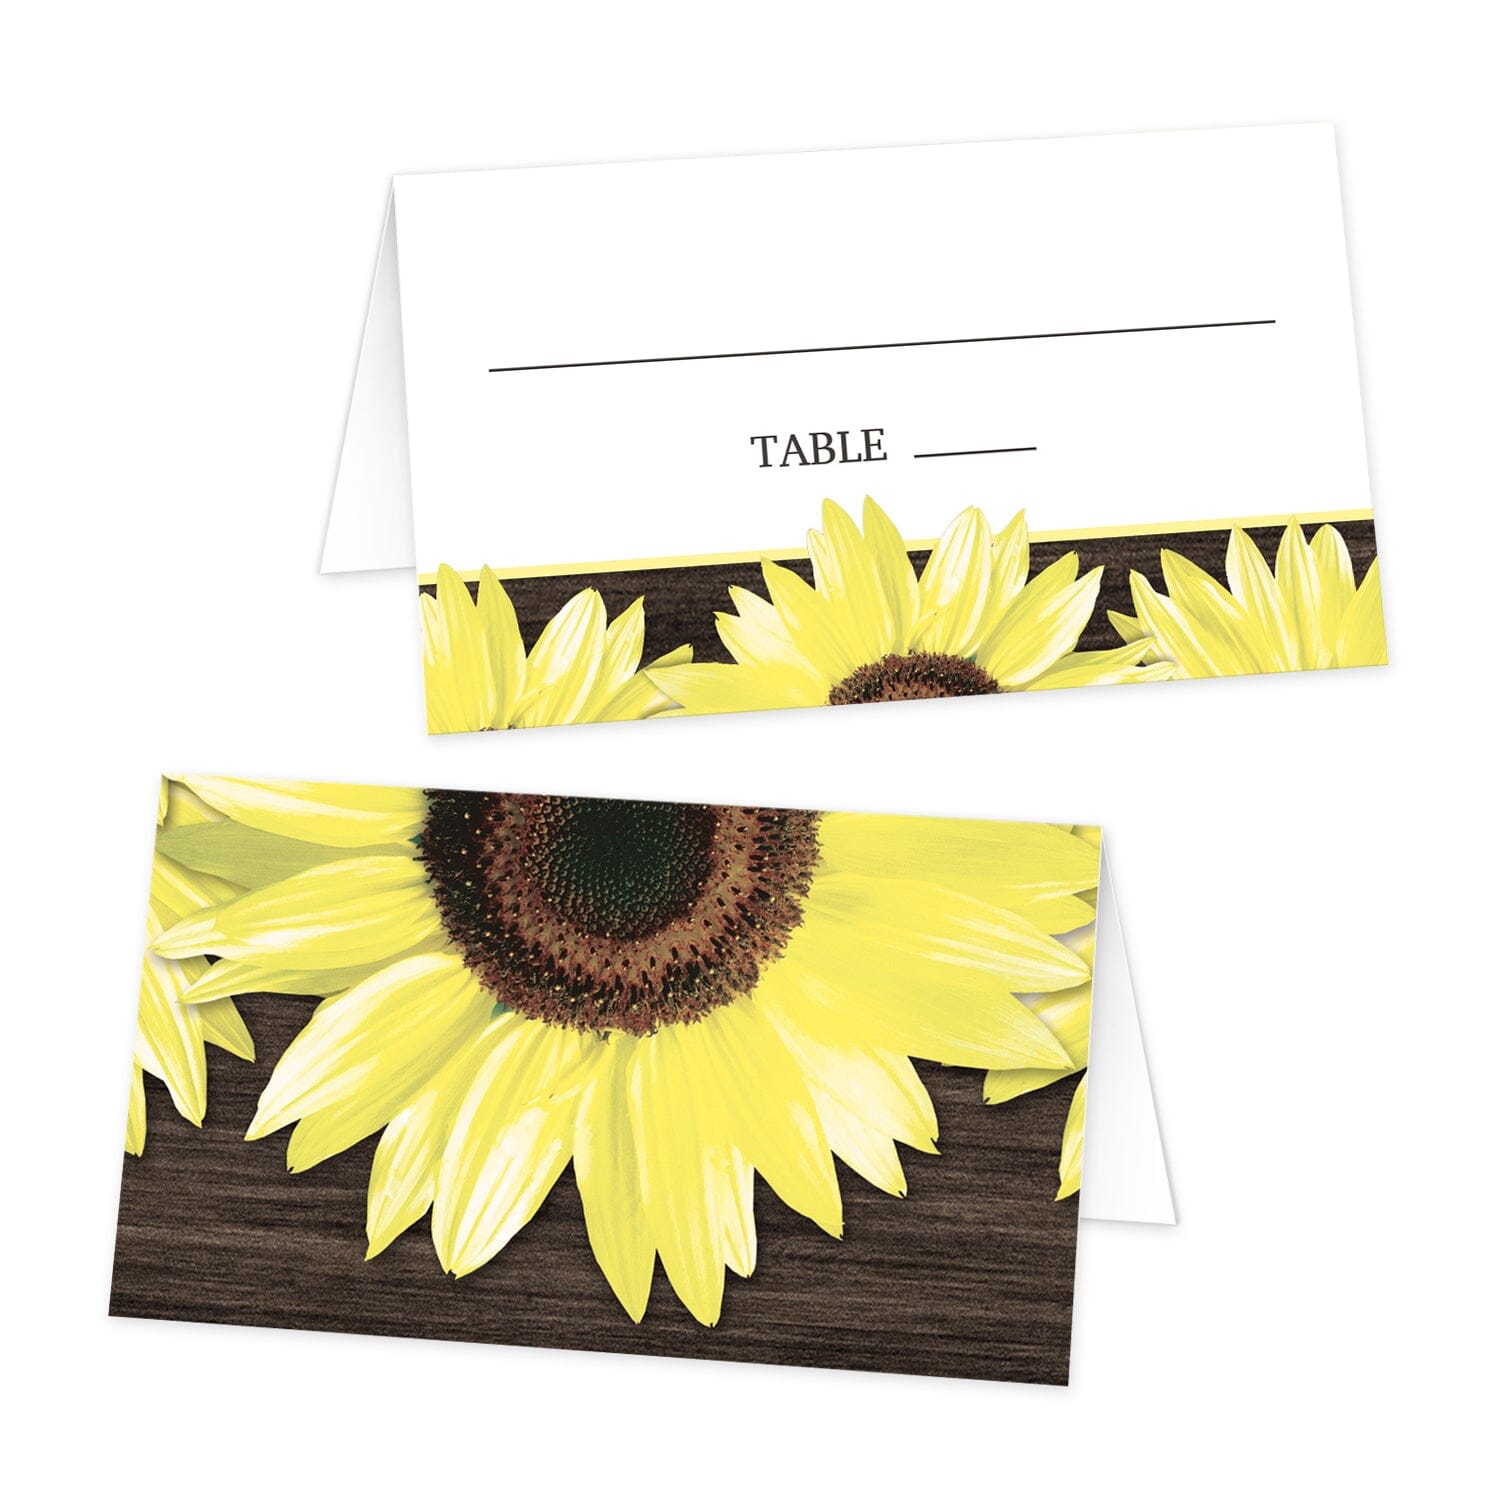 Rustic Sunflower and Wood Folded Place Cards at Artistically Invited. Southern-inspired rustic sunflower and wood folded place cards with large yellow sunflowers over a brown rustic wood background on one side of the cards. Your lines for writing the guest's name and table number are on the other side of the fold of these cards in a white space above smaller sunflowers and a wood background that runs along the bottom.